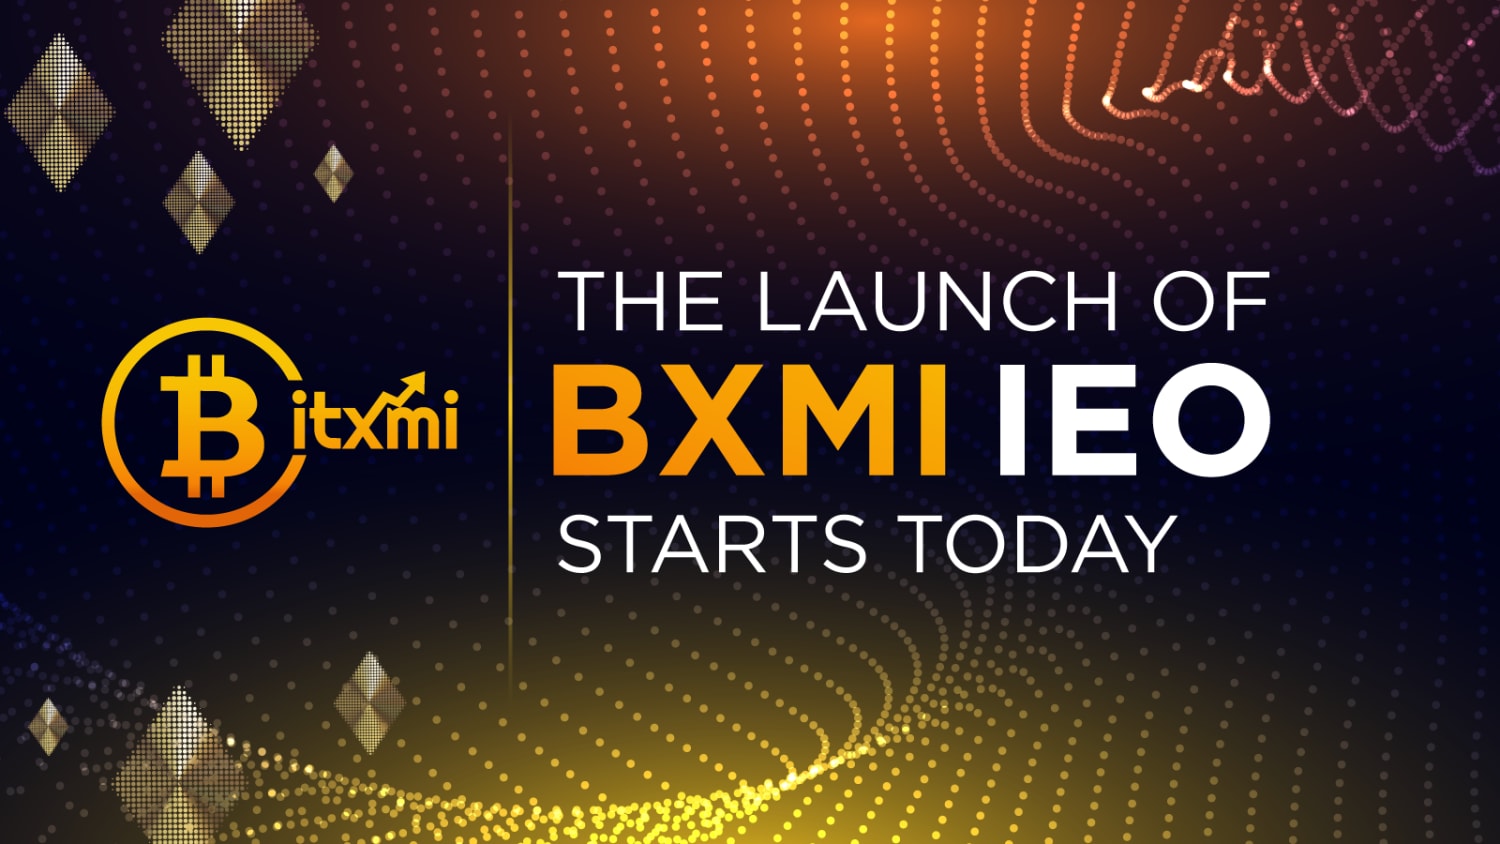 The Launch of BXMI IEO Starts Today